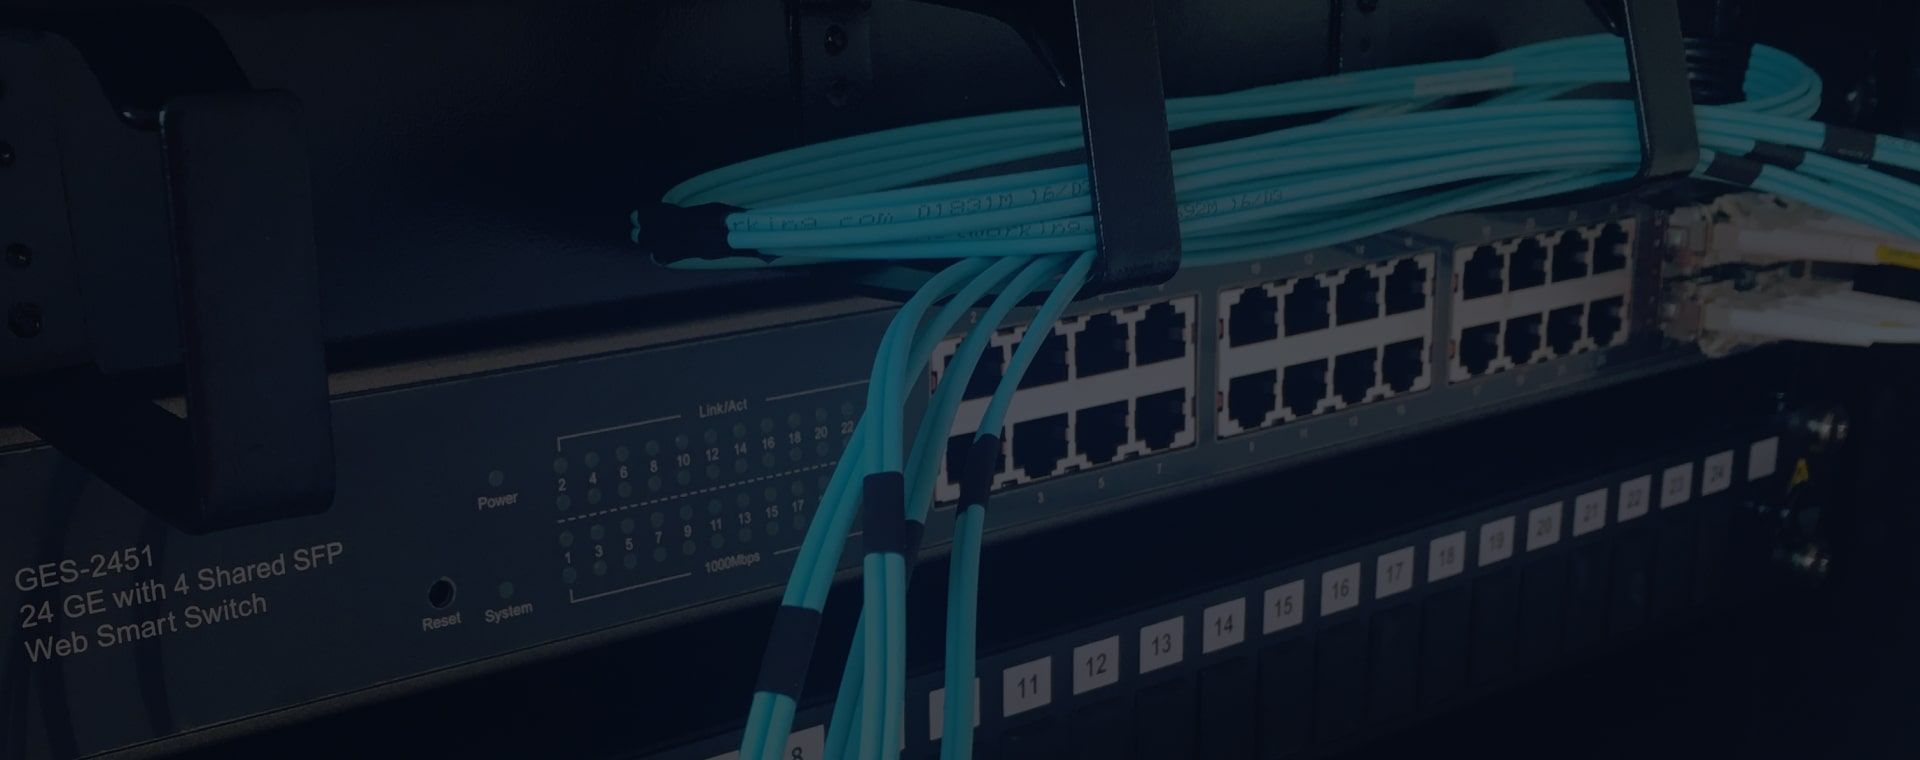 Structured Cabling | Structured Cabling Installer